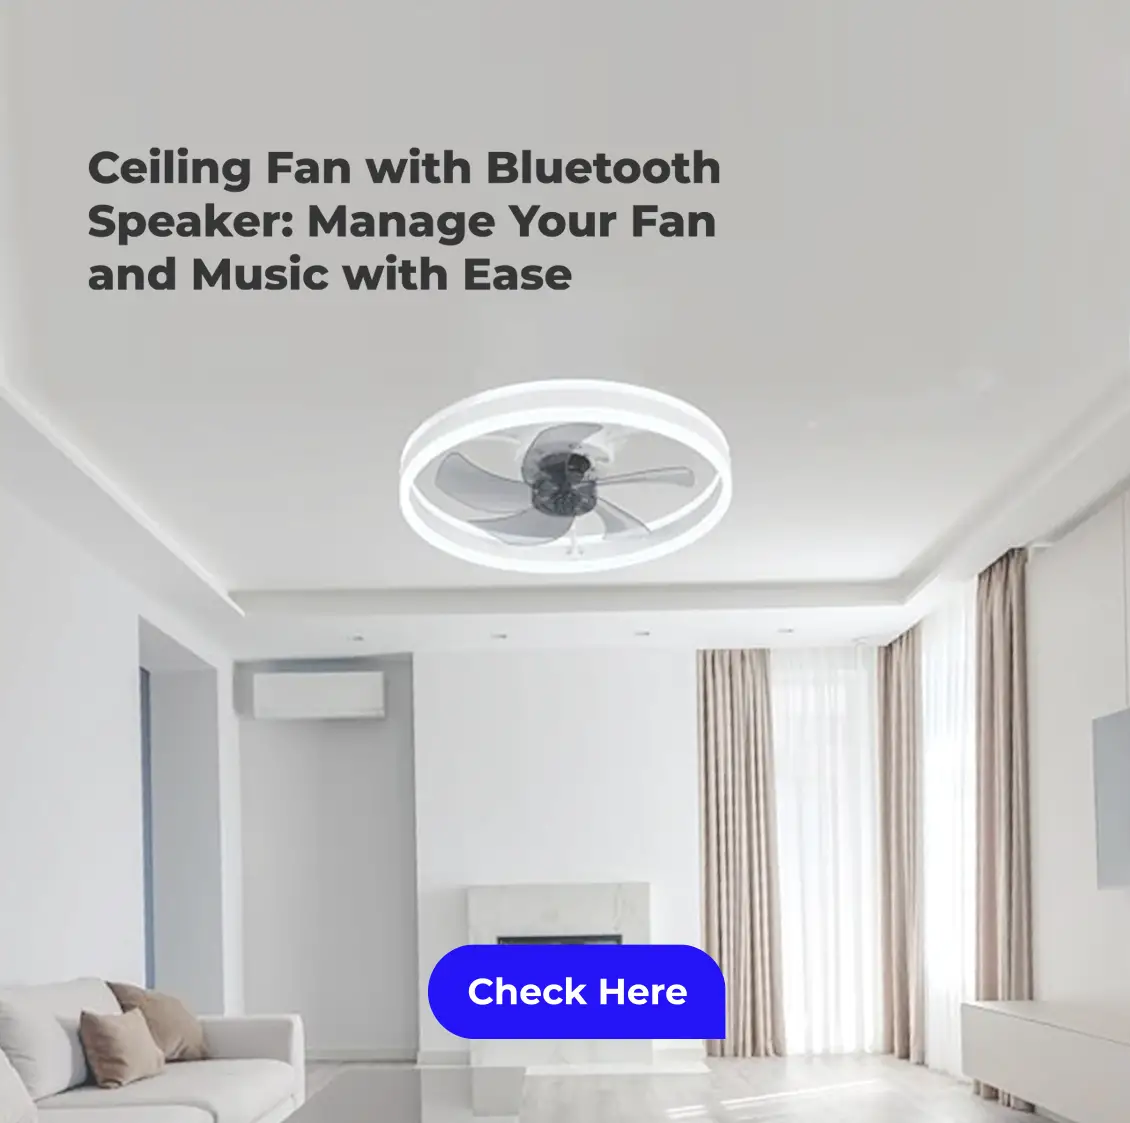 Ceiling Fan with Bluetooth Speaker image 1 Techie Trickle